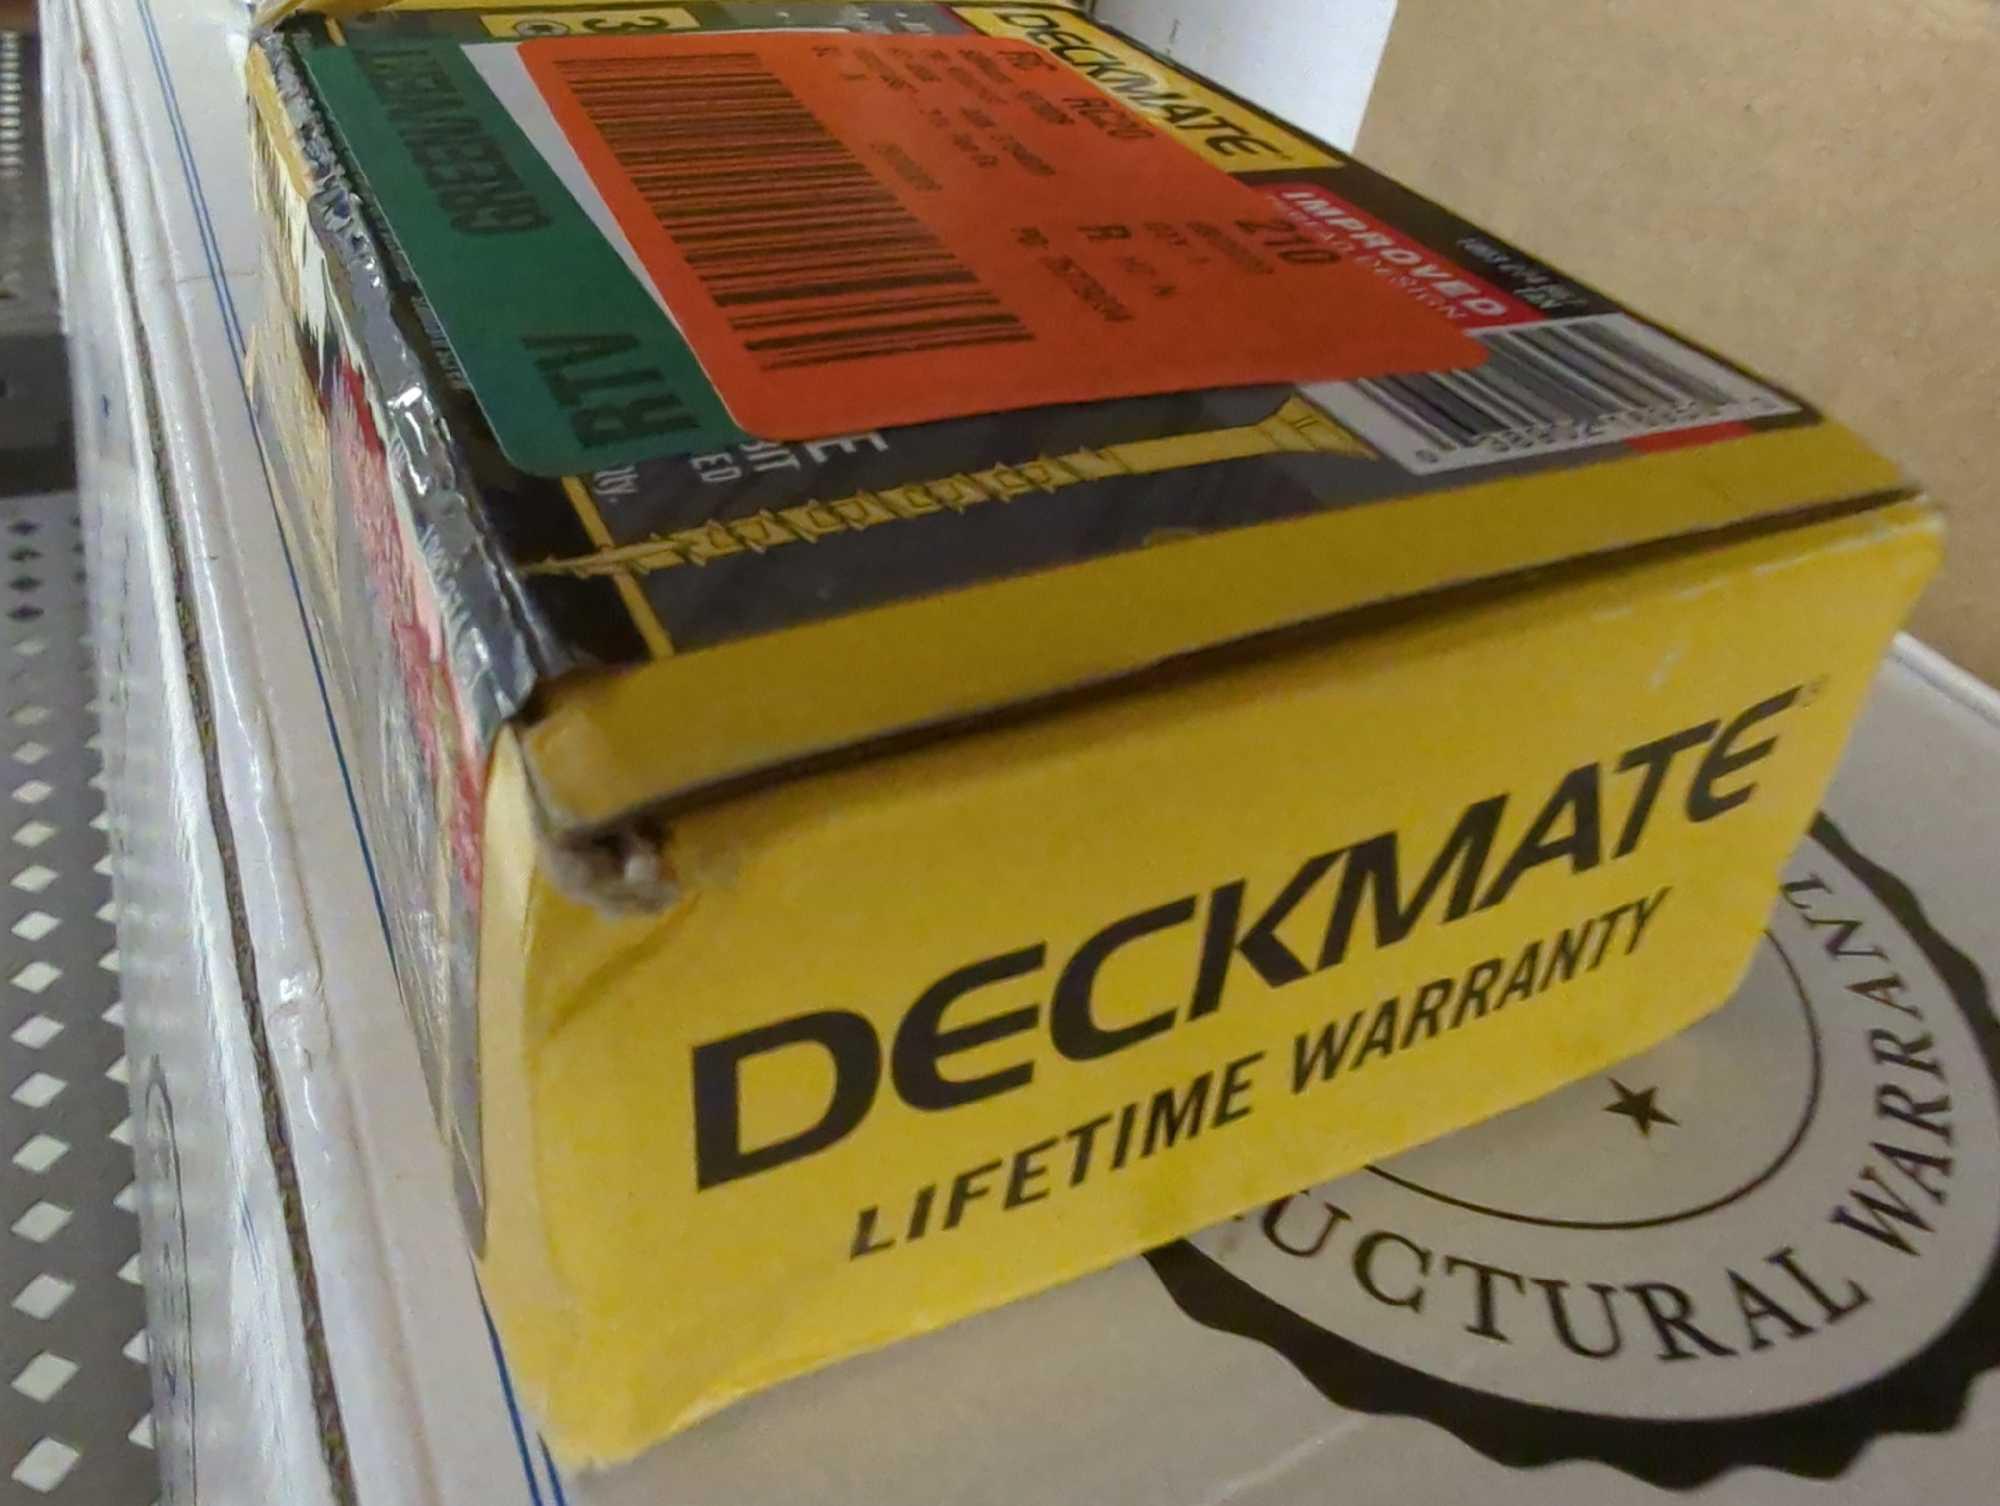 Lot of 2 Items To Include, 1 LB Box of Deckmate DECKMATE #9 x 3 in. Star Flat-Head Wood Deck Screw 1